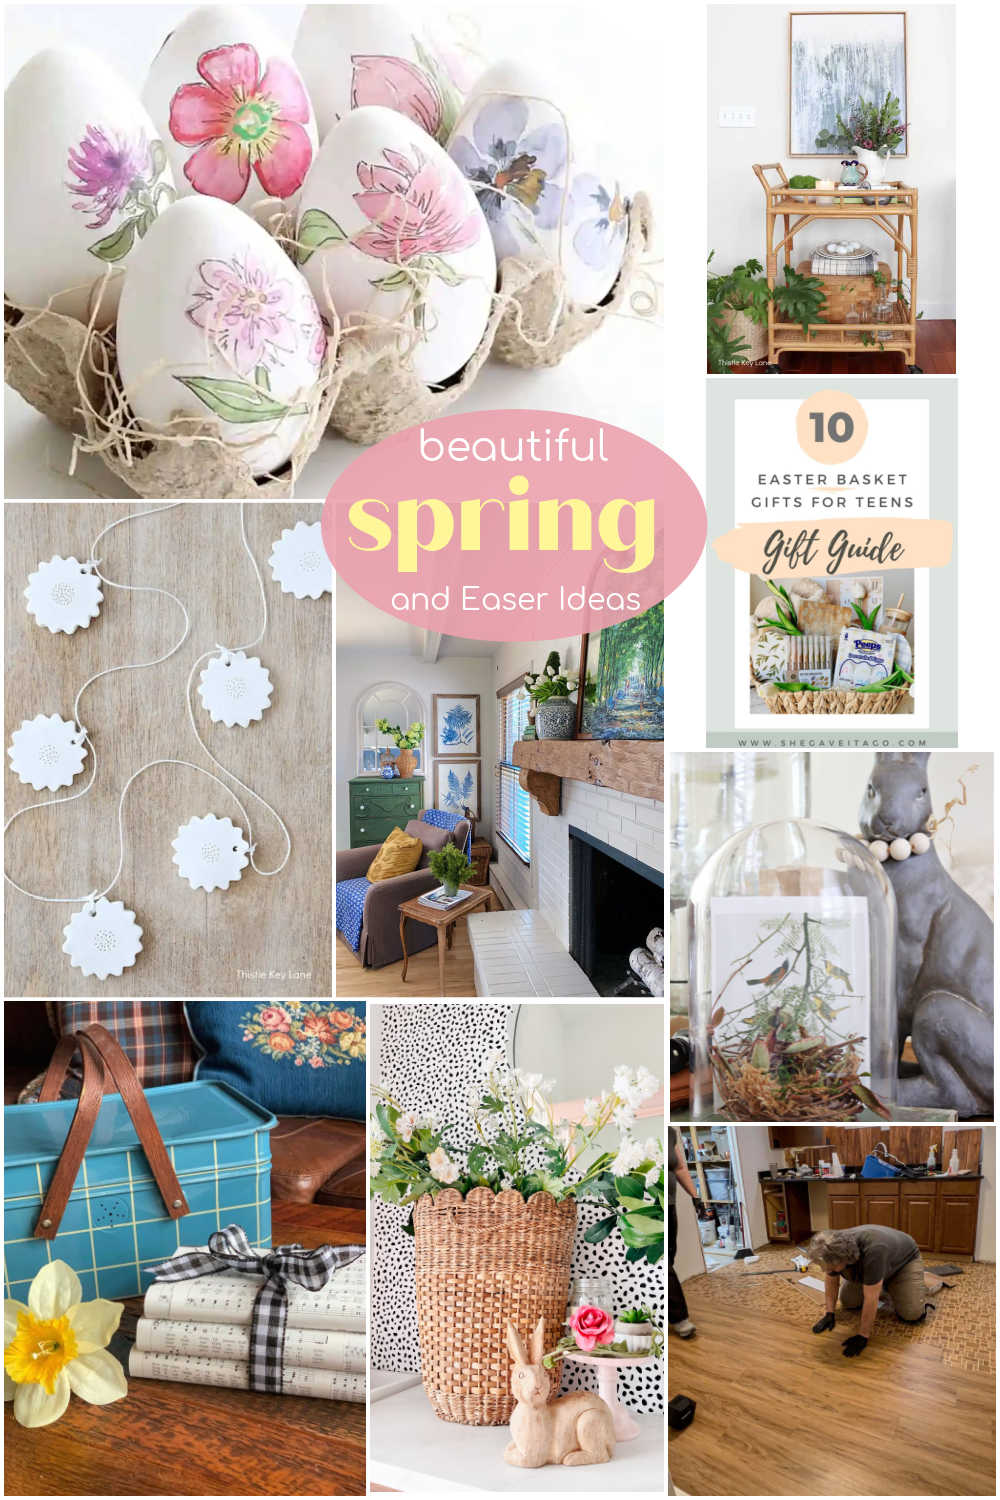 Beautiful Spring and Easter Ideas! It's getting warm, time to start thinking about Easter and spring home ideas!